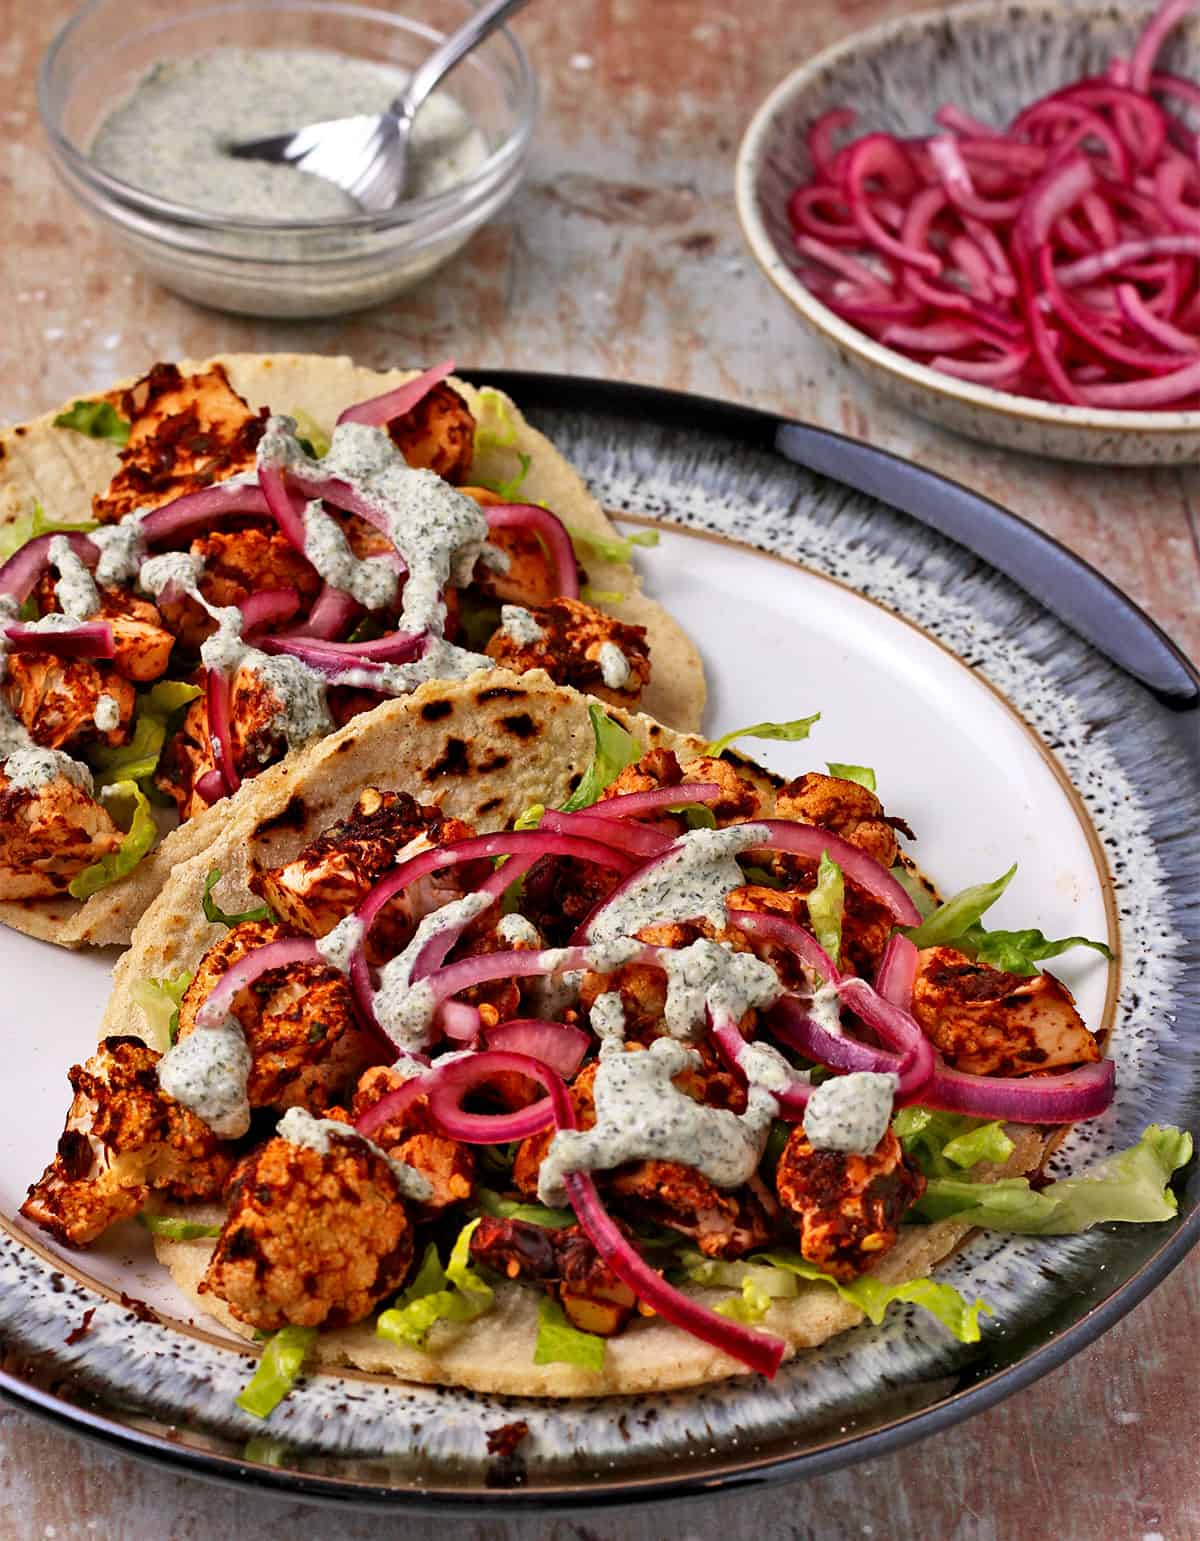 Roasted cauliflower tacos with pepita dressing, shredded lettuce, and pickled red onions.